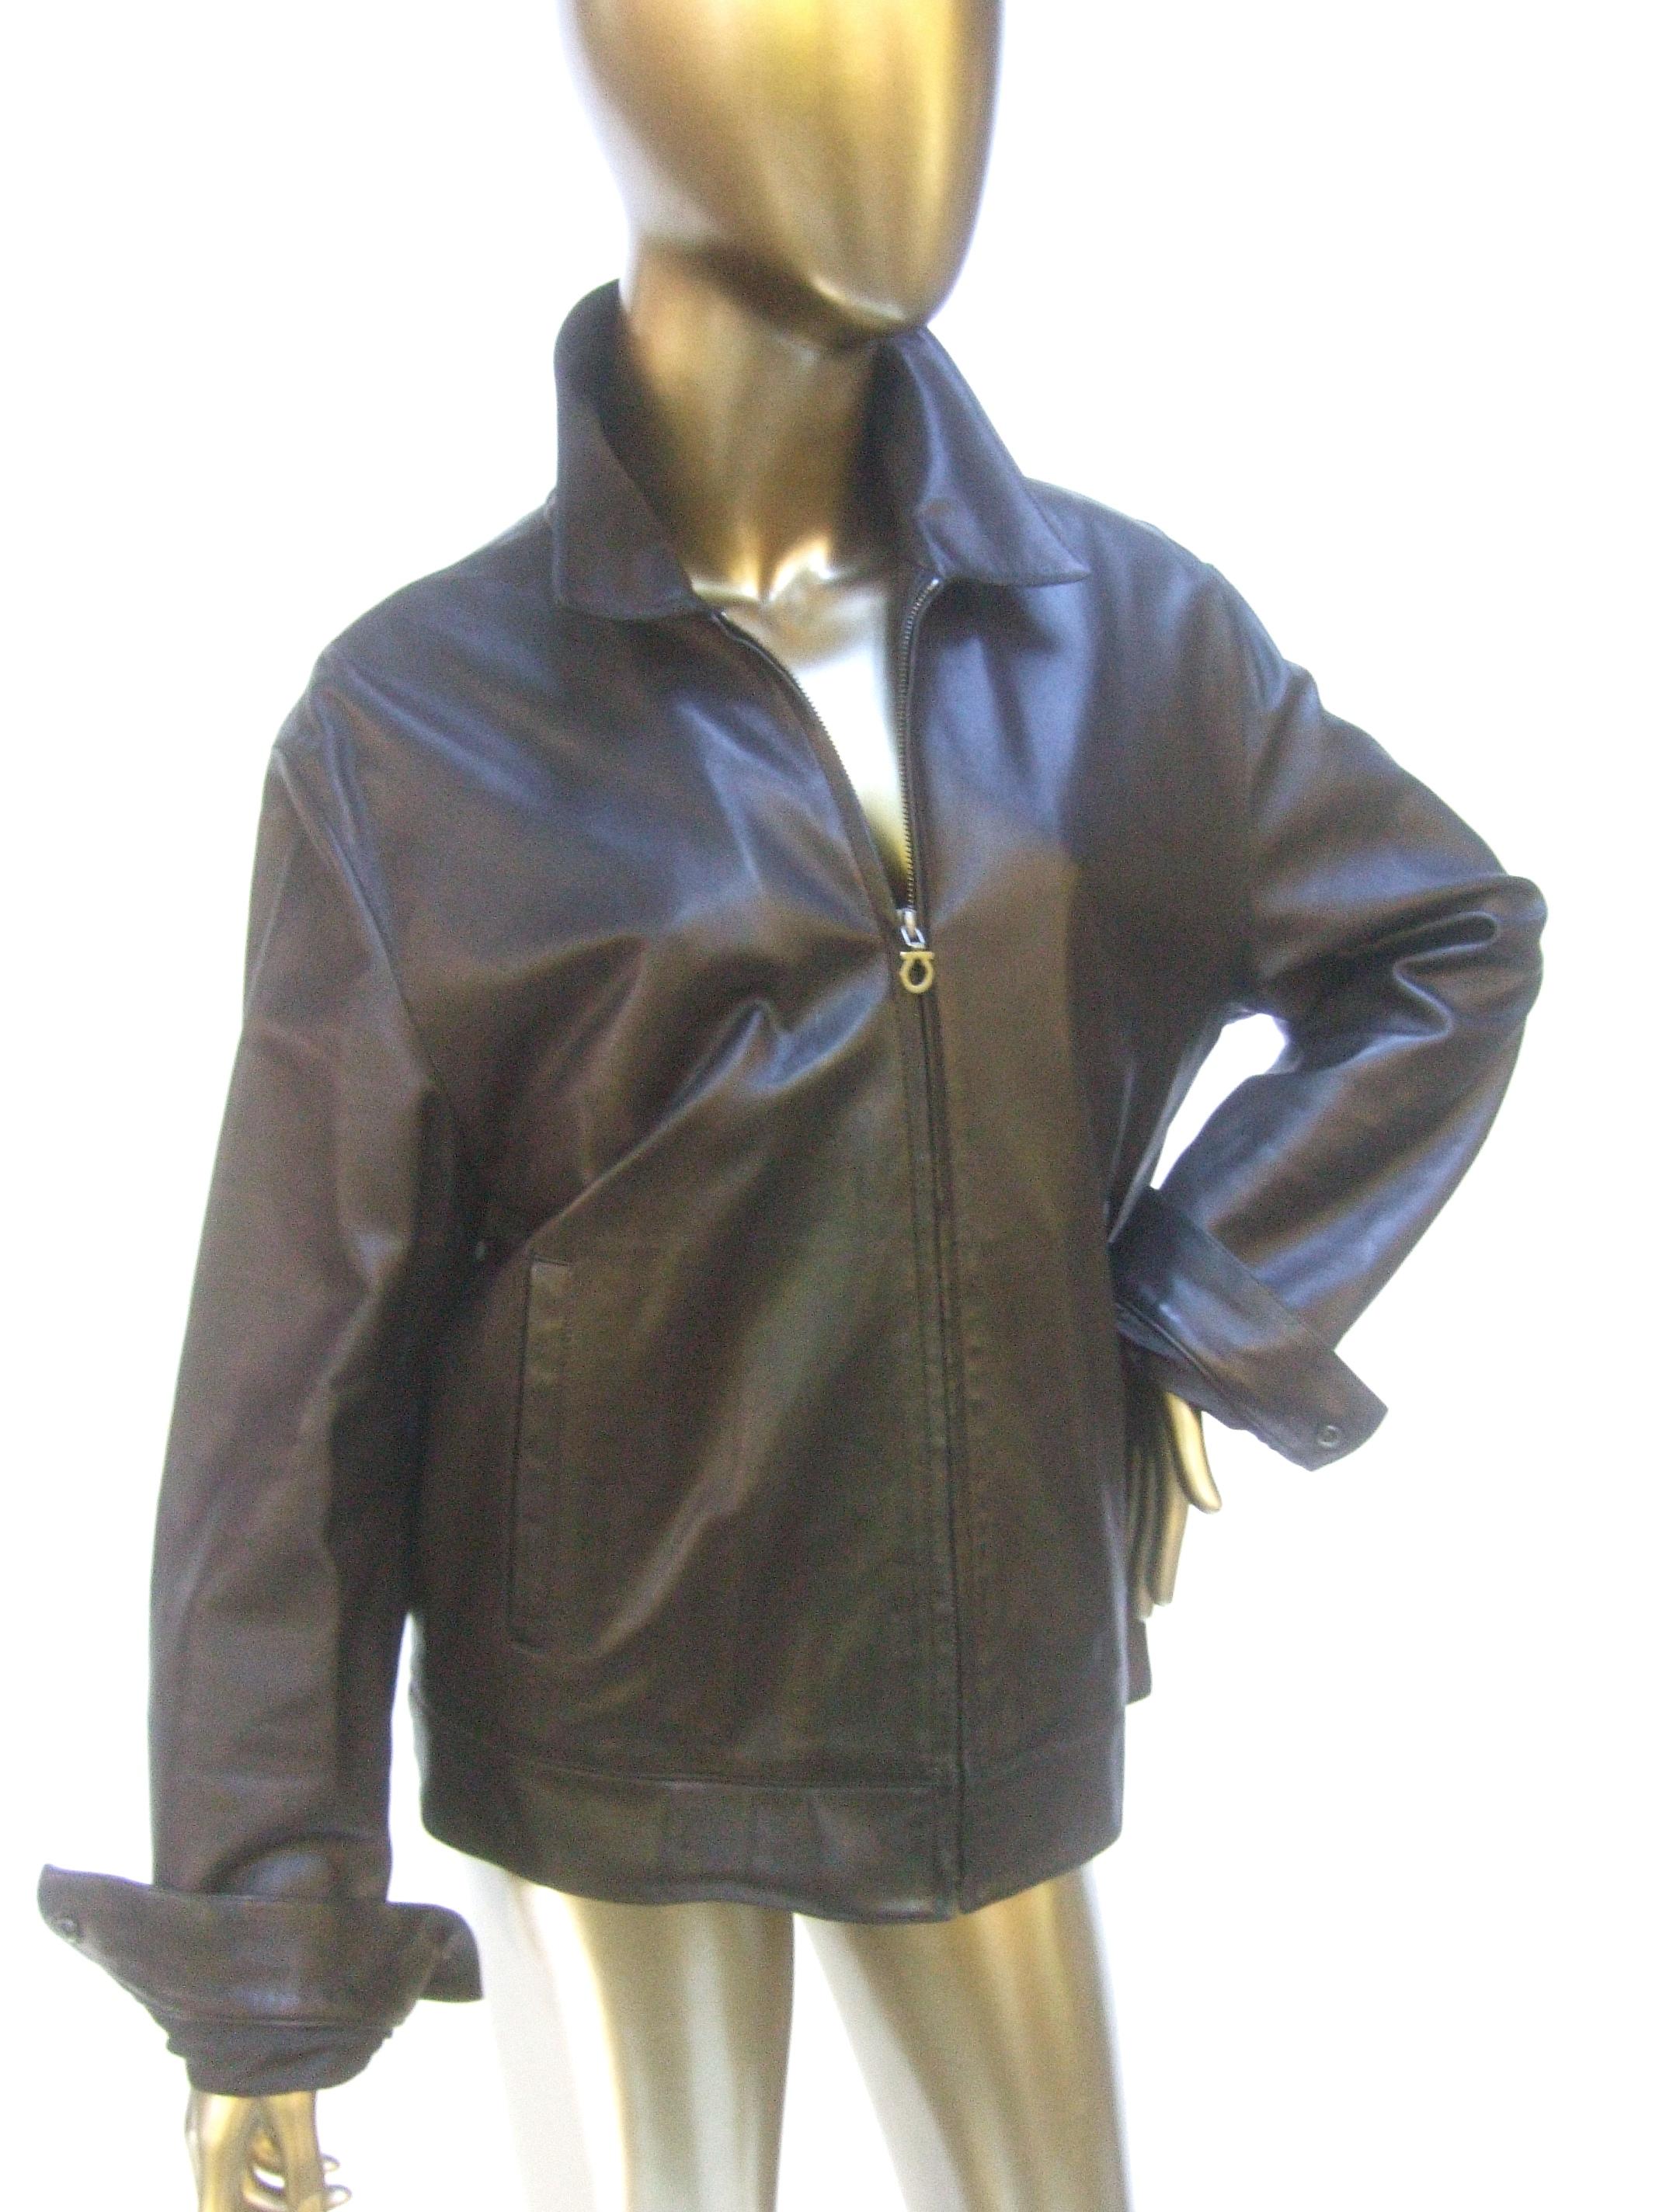 Salvatore Ferragamo Italian chocolate brown unisex leather zippered jacket 
The dark brown lightweight Italian leather jacket is buttery soft with a zipper
that runs down the center. Designed with a pair of slit pockets one on each
exterior